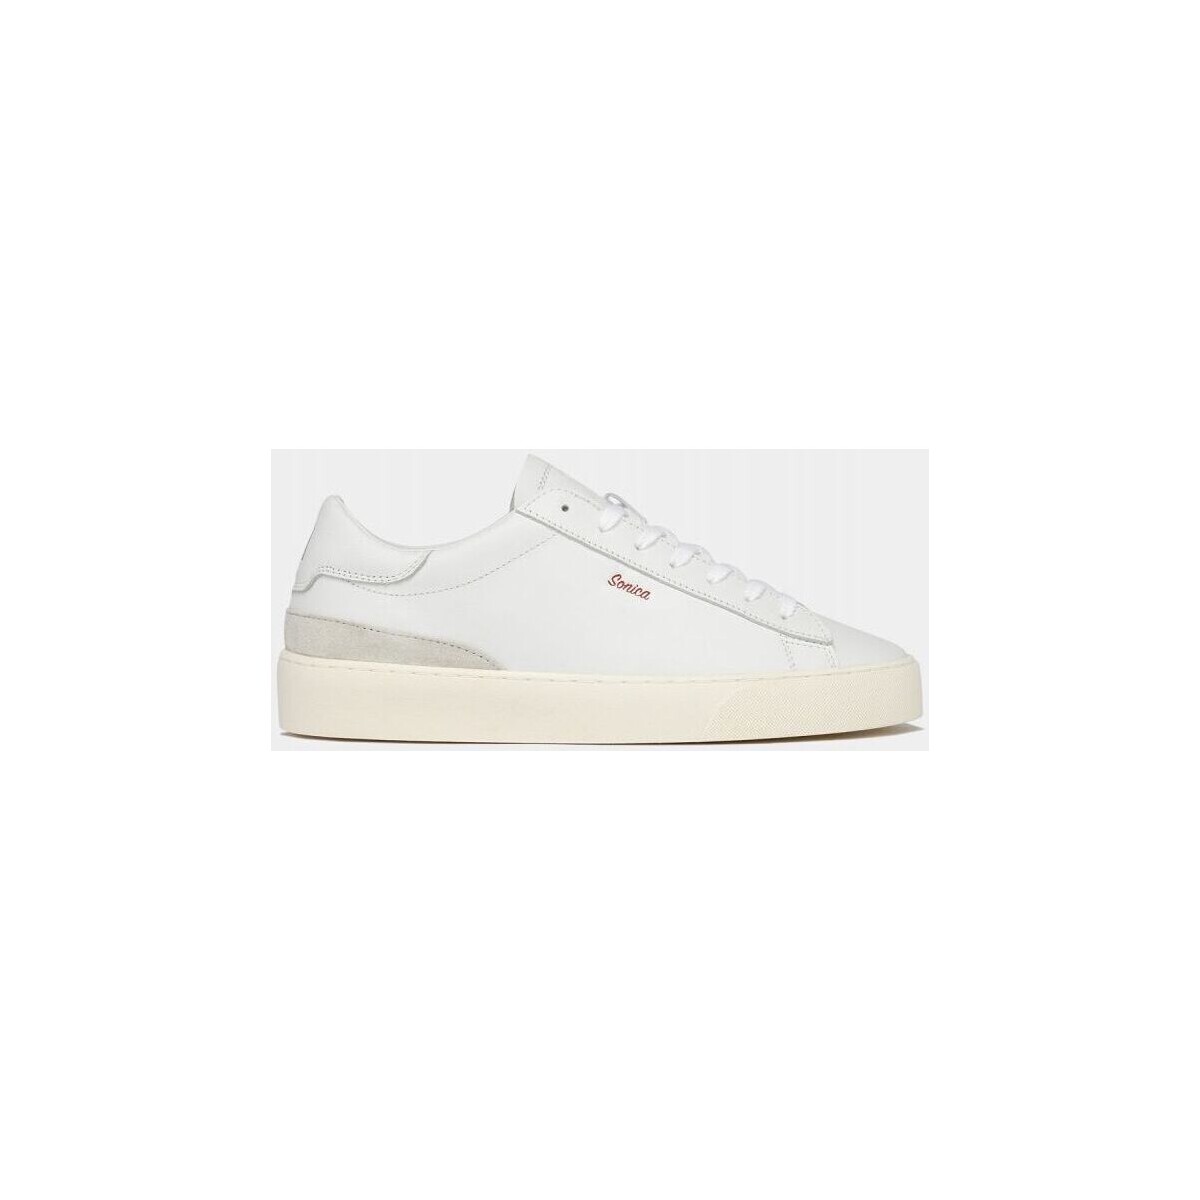 Chaussures Homme Anatomic & Co M401-SO-CA-WH - SONICA-TOTAL WHITE Blanc